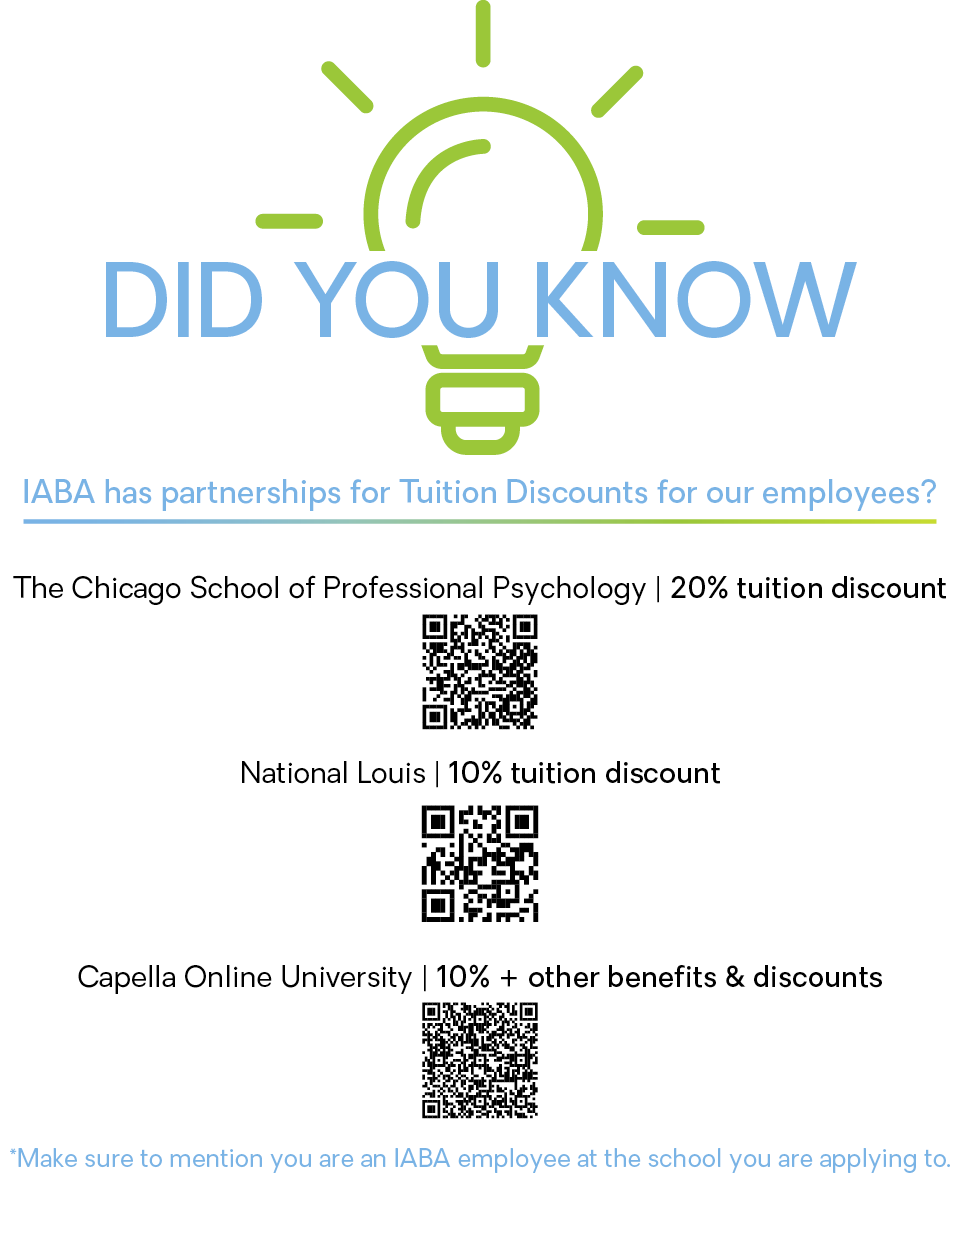 IABA Tuition Discount image. QR codes included to scan for more information.